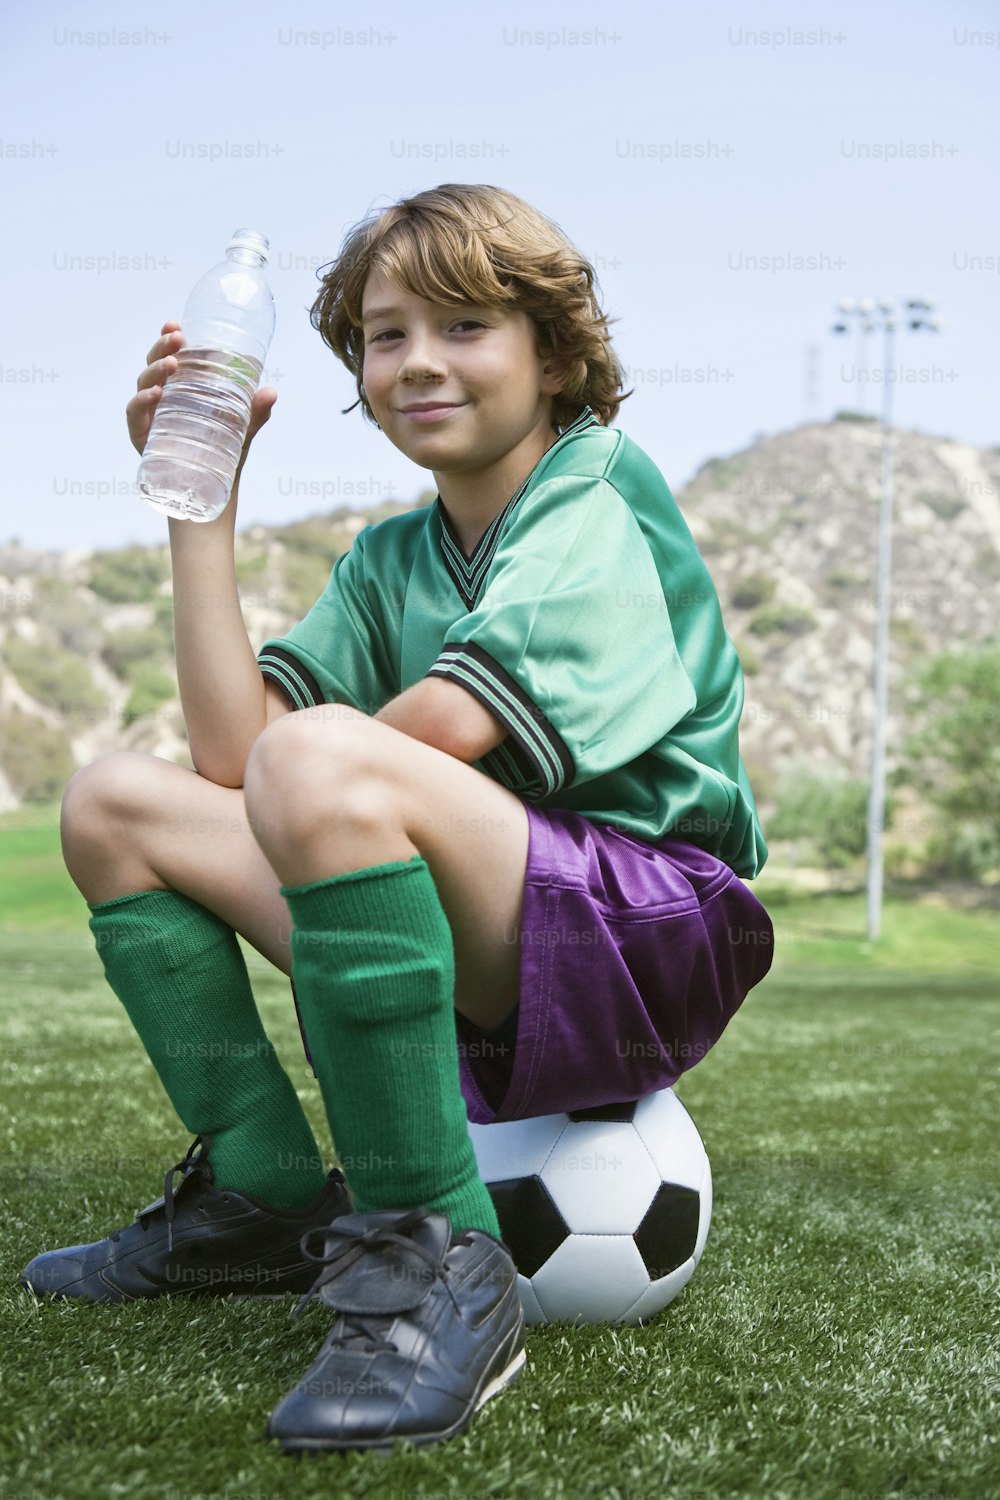 a young boy sitting on top of a soccer ball holding a water bottle